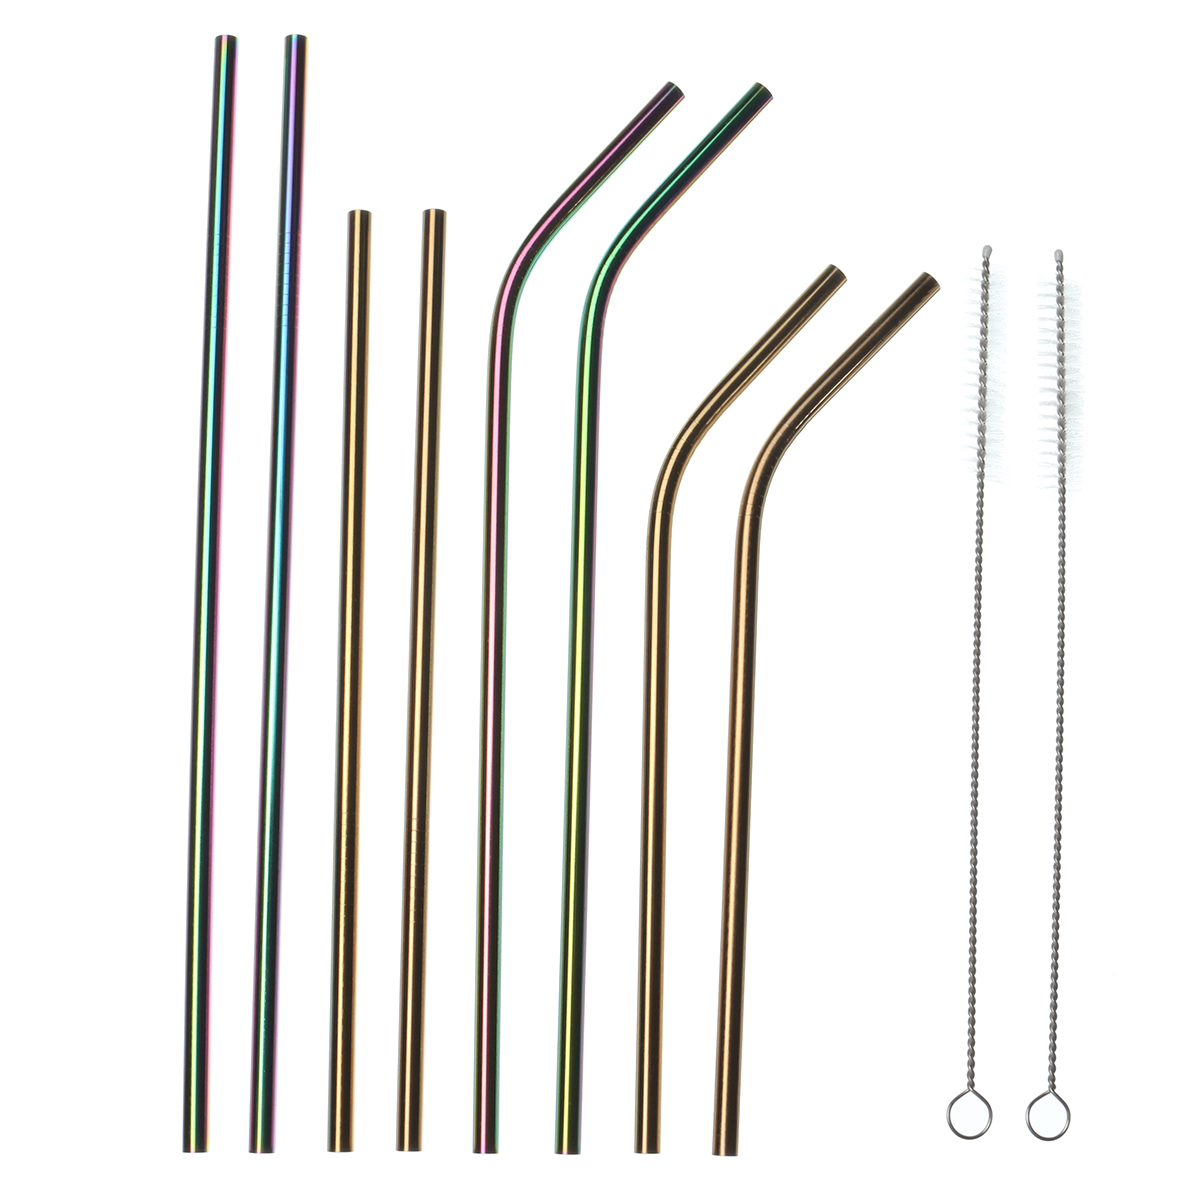 Stainless-Steel-Straw-Set-Long-Metal-Environment-Friendly-Drinking-Straws-Kit-With-2-Brushes-Bag-1311599-6